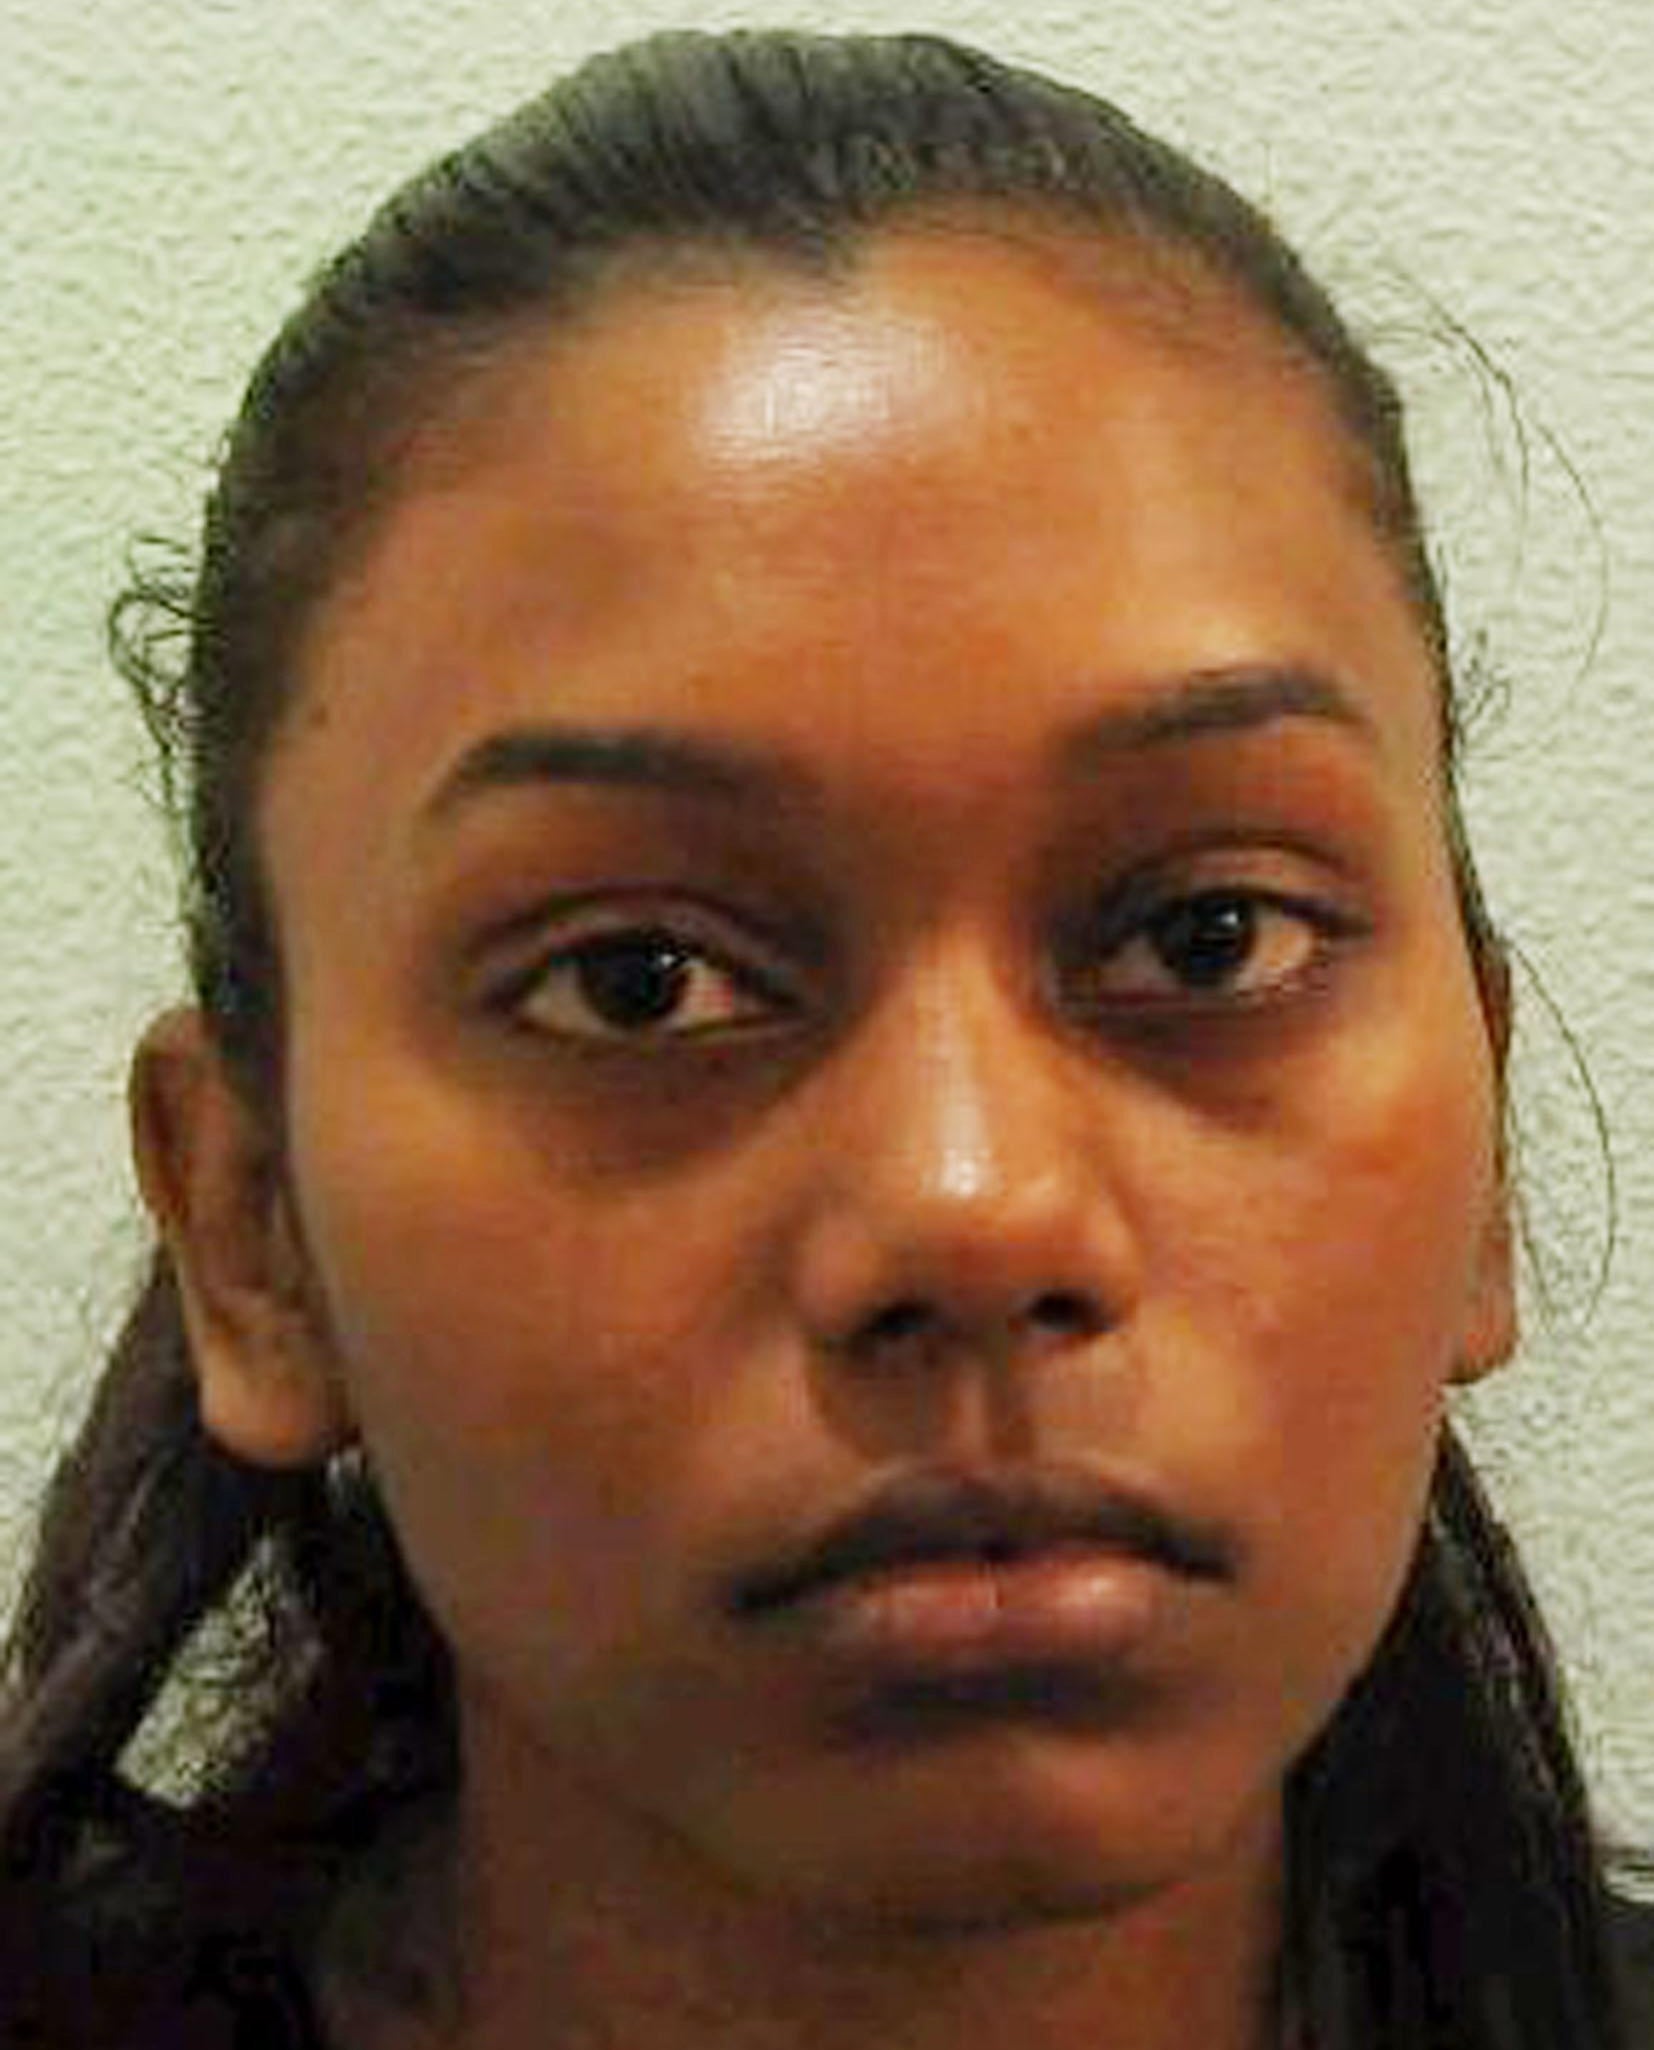 Samantha Joseph, then 15, lured of Shakilus Townsend, 16, to his death in Thornton Heath, south London in 2008